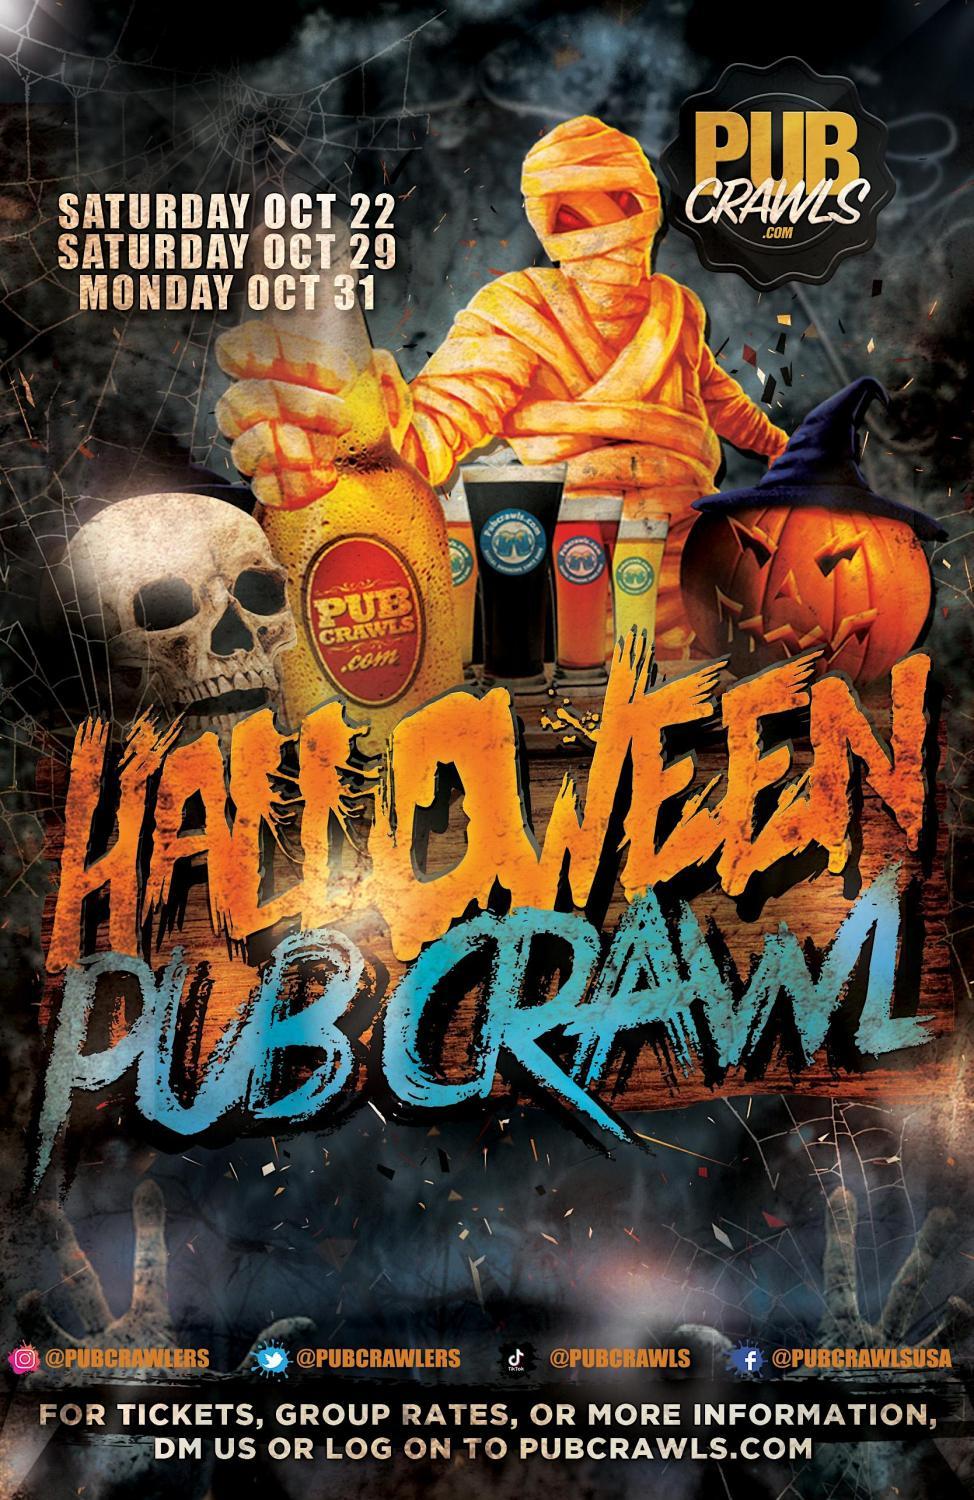 Fort Worth Happy Hour Halloween Bar Crawl
Sat Oct 22, 1:00 PM - Sat Oct 22, 8:00 PM
in 2 days